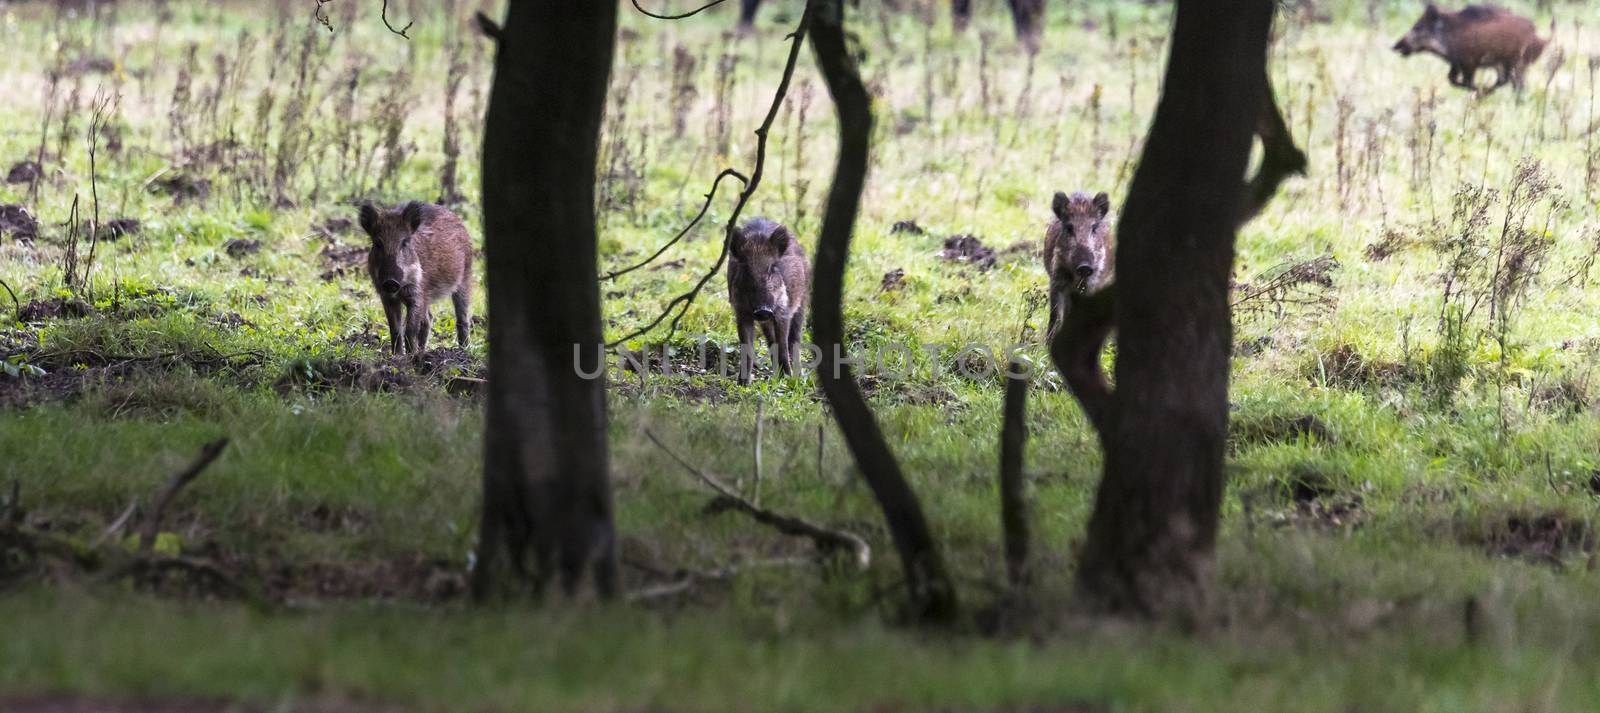 three wildboar ,Sus scrofa, in the national park the veluwezoom in holland in natural forest habitat looking at the camera